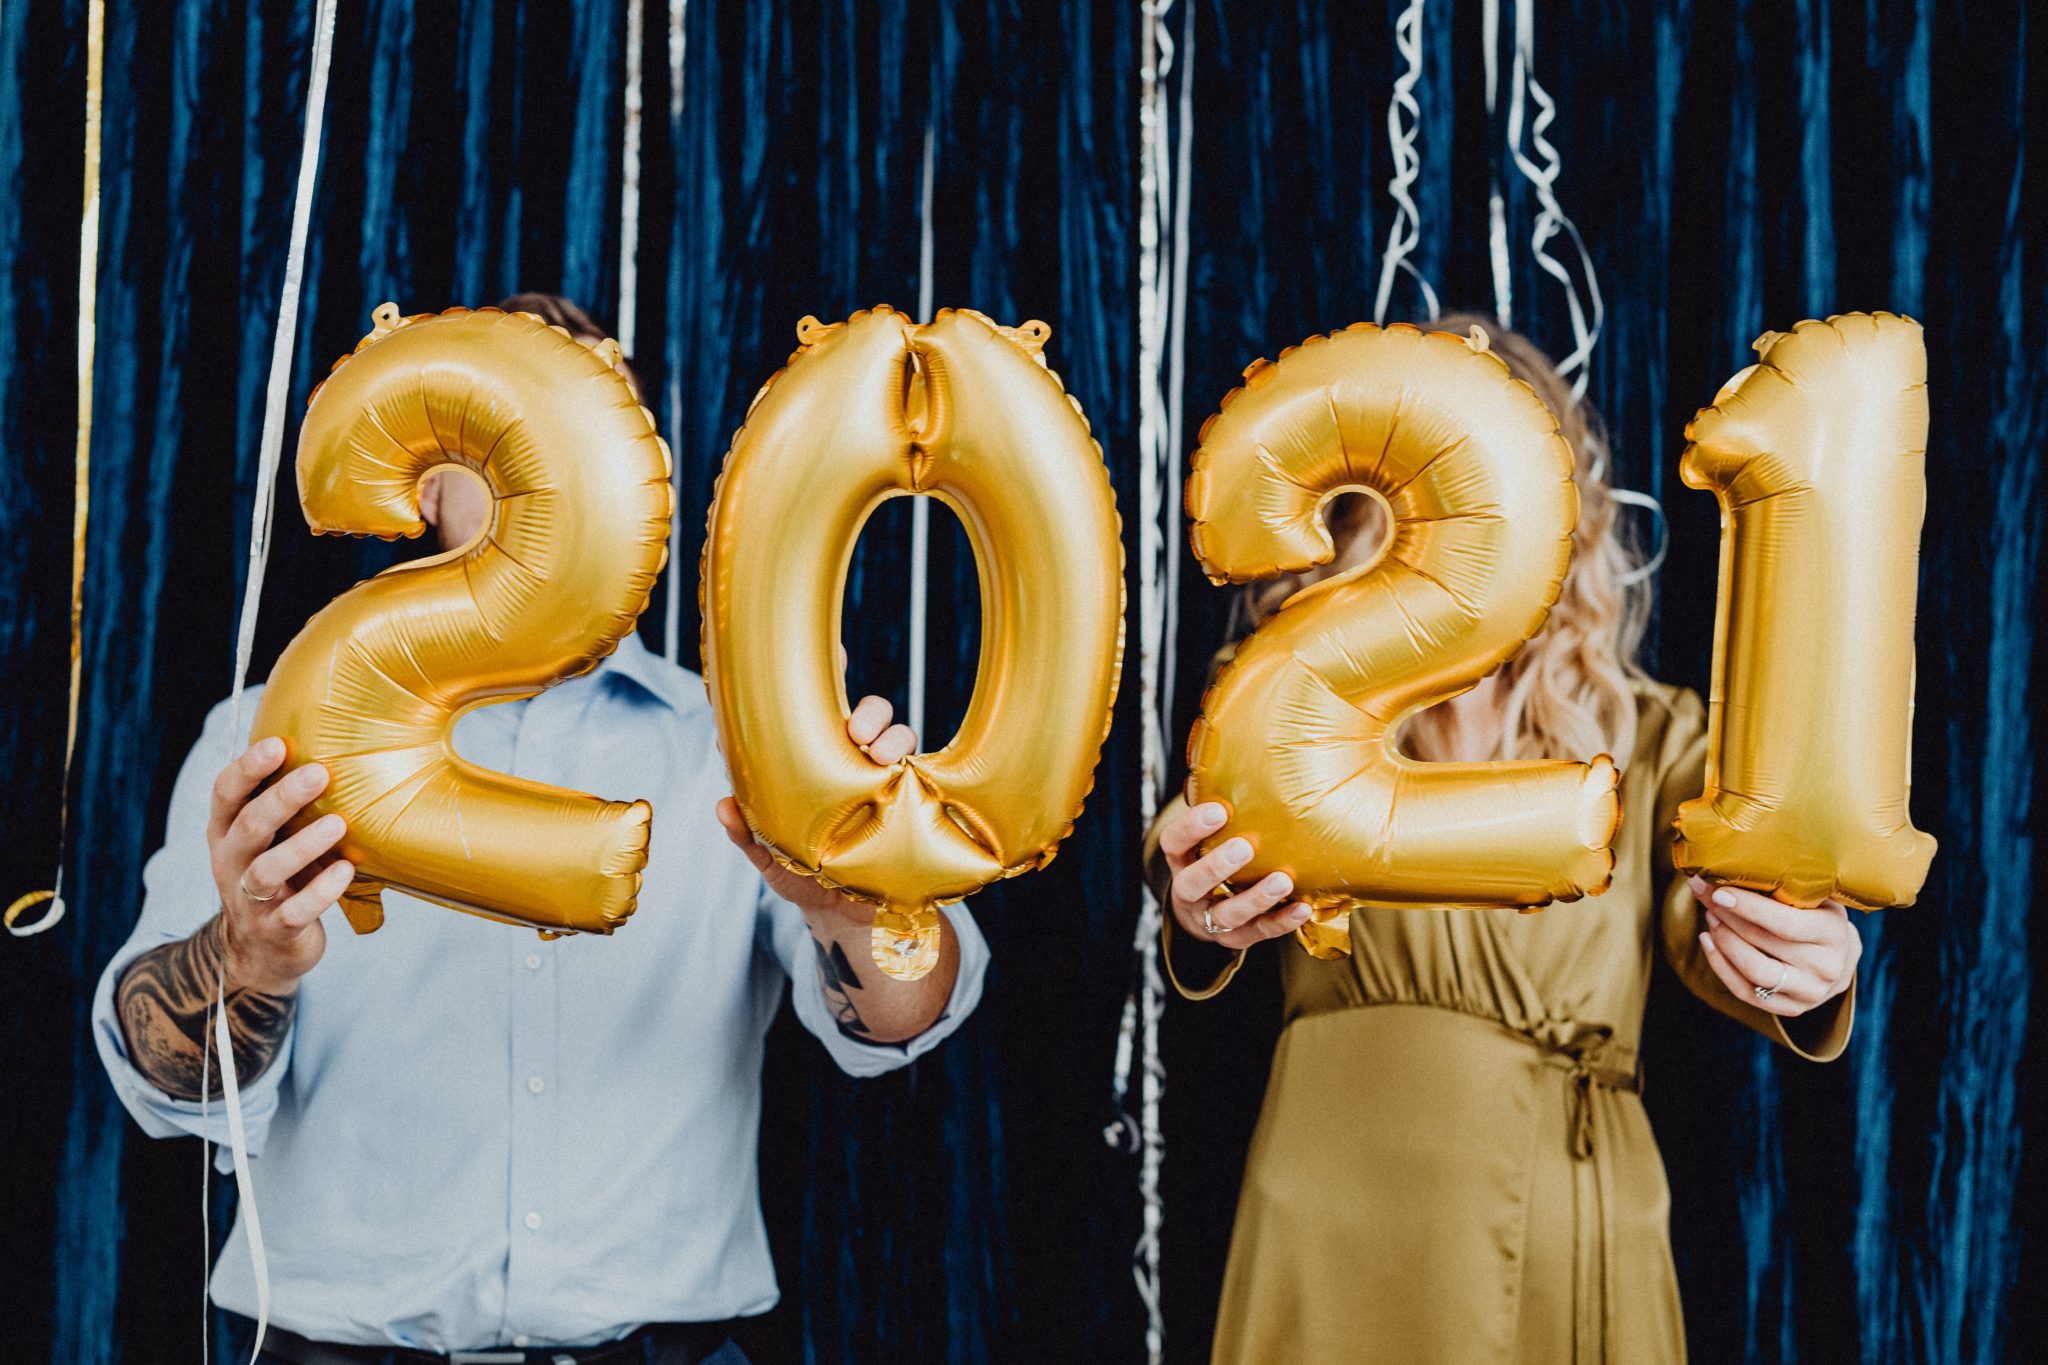 With the new year here, it's time to revisit what your print management services for 2021 will look like and what to expect.